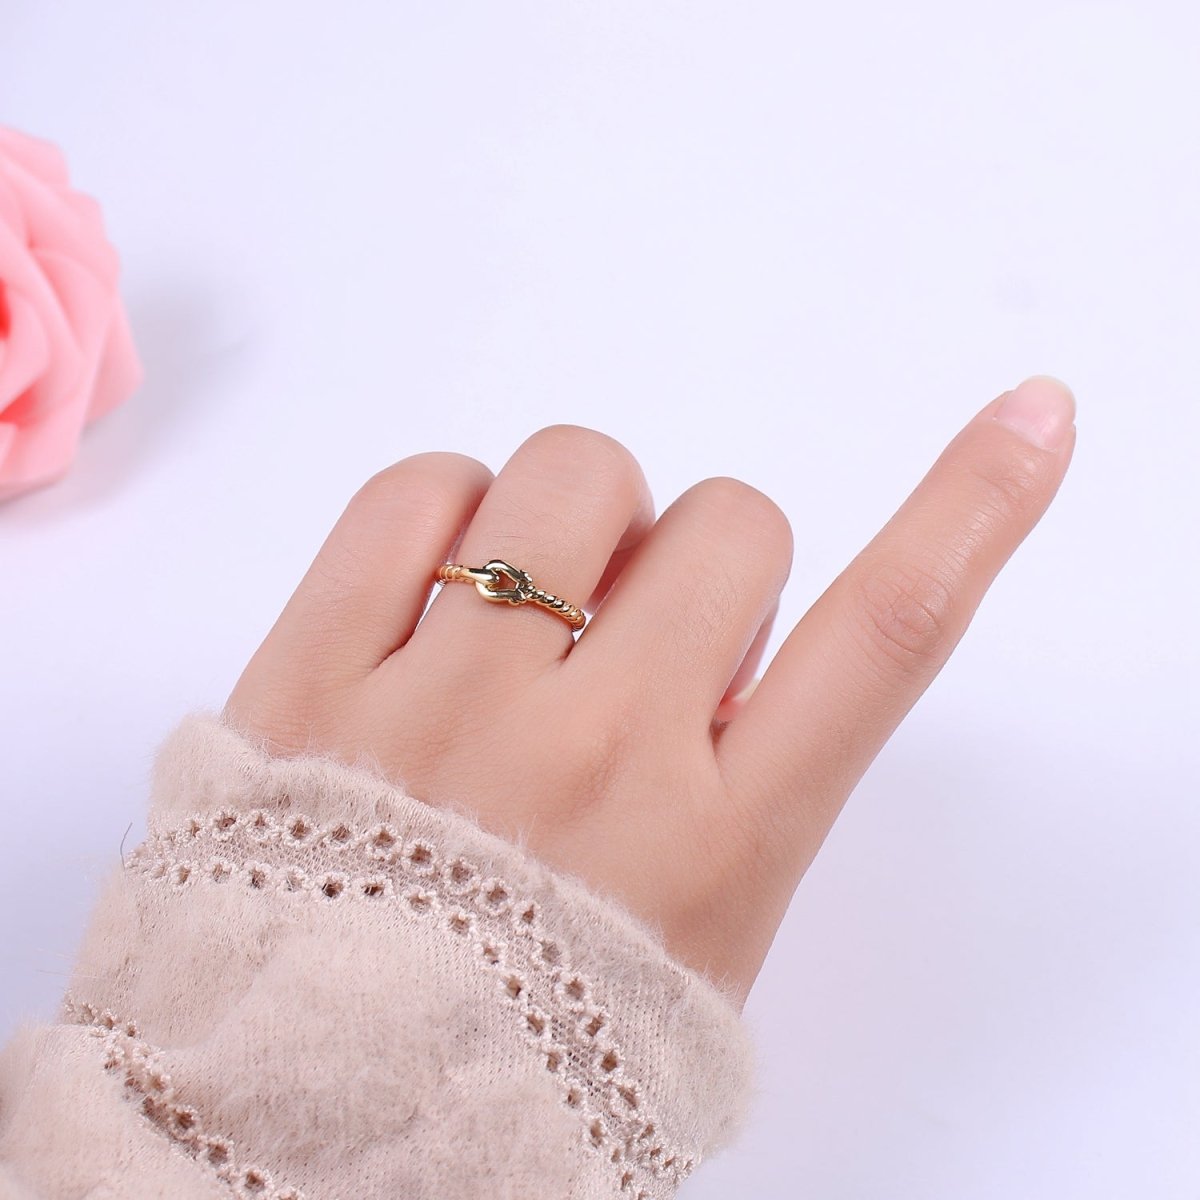 Belt Buckle Ring Twisted Belt Ring Band Dainty Ring Open Adjustable Holiday Gifts Christmas Gifts Birthday Gifts. Women's Rings U-223 - DLUXCA